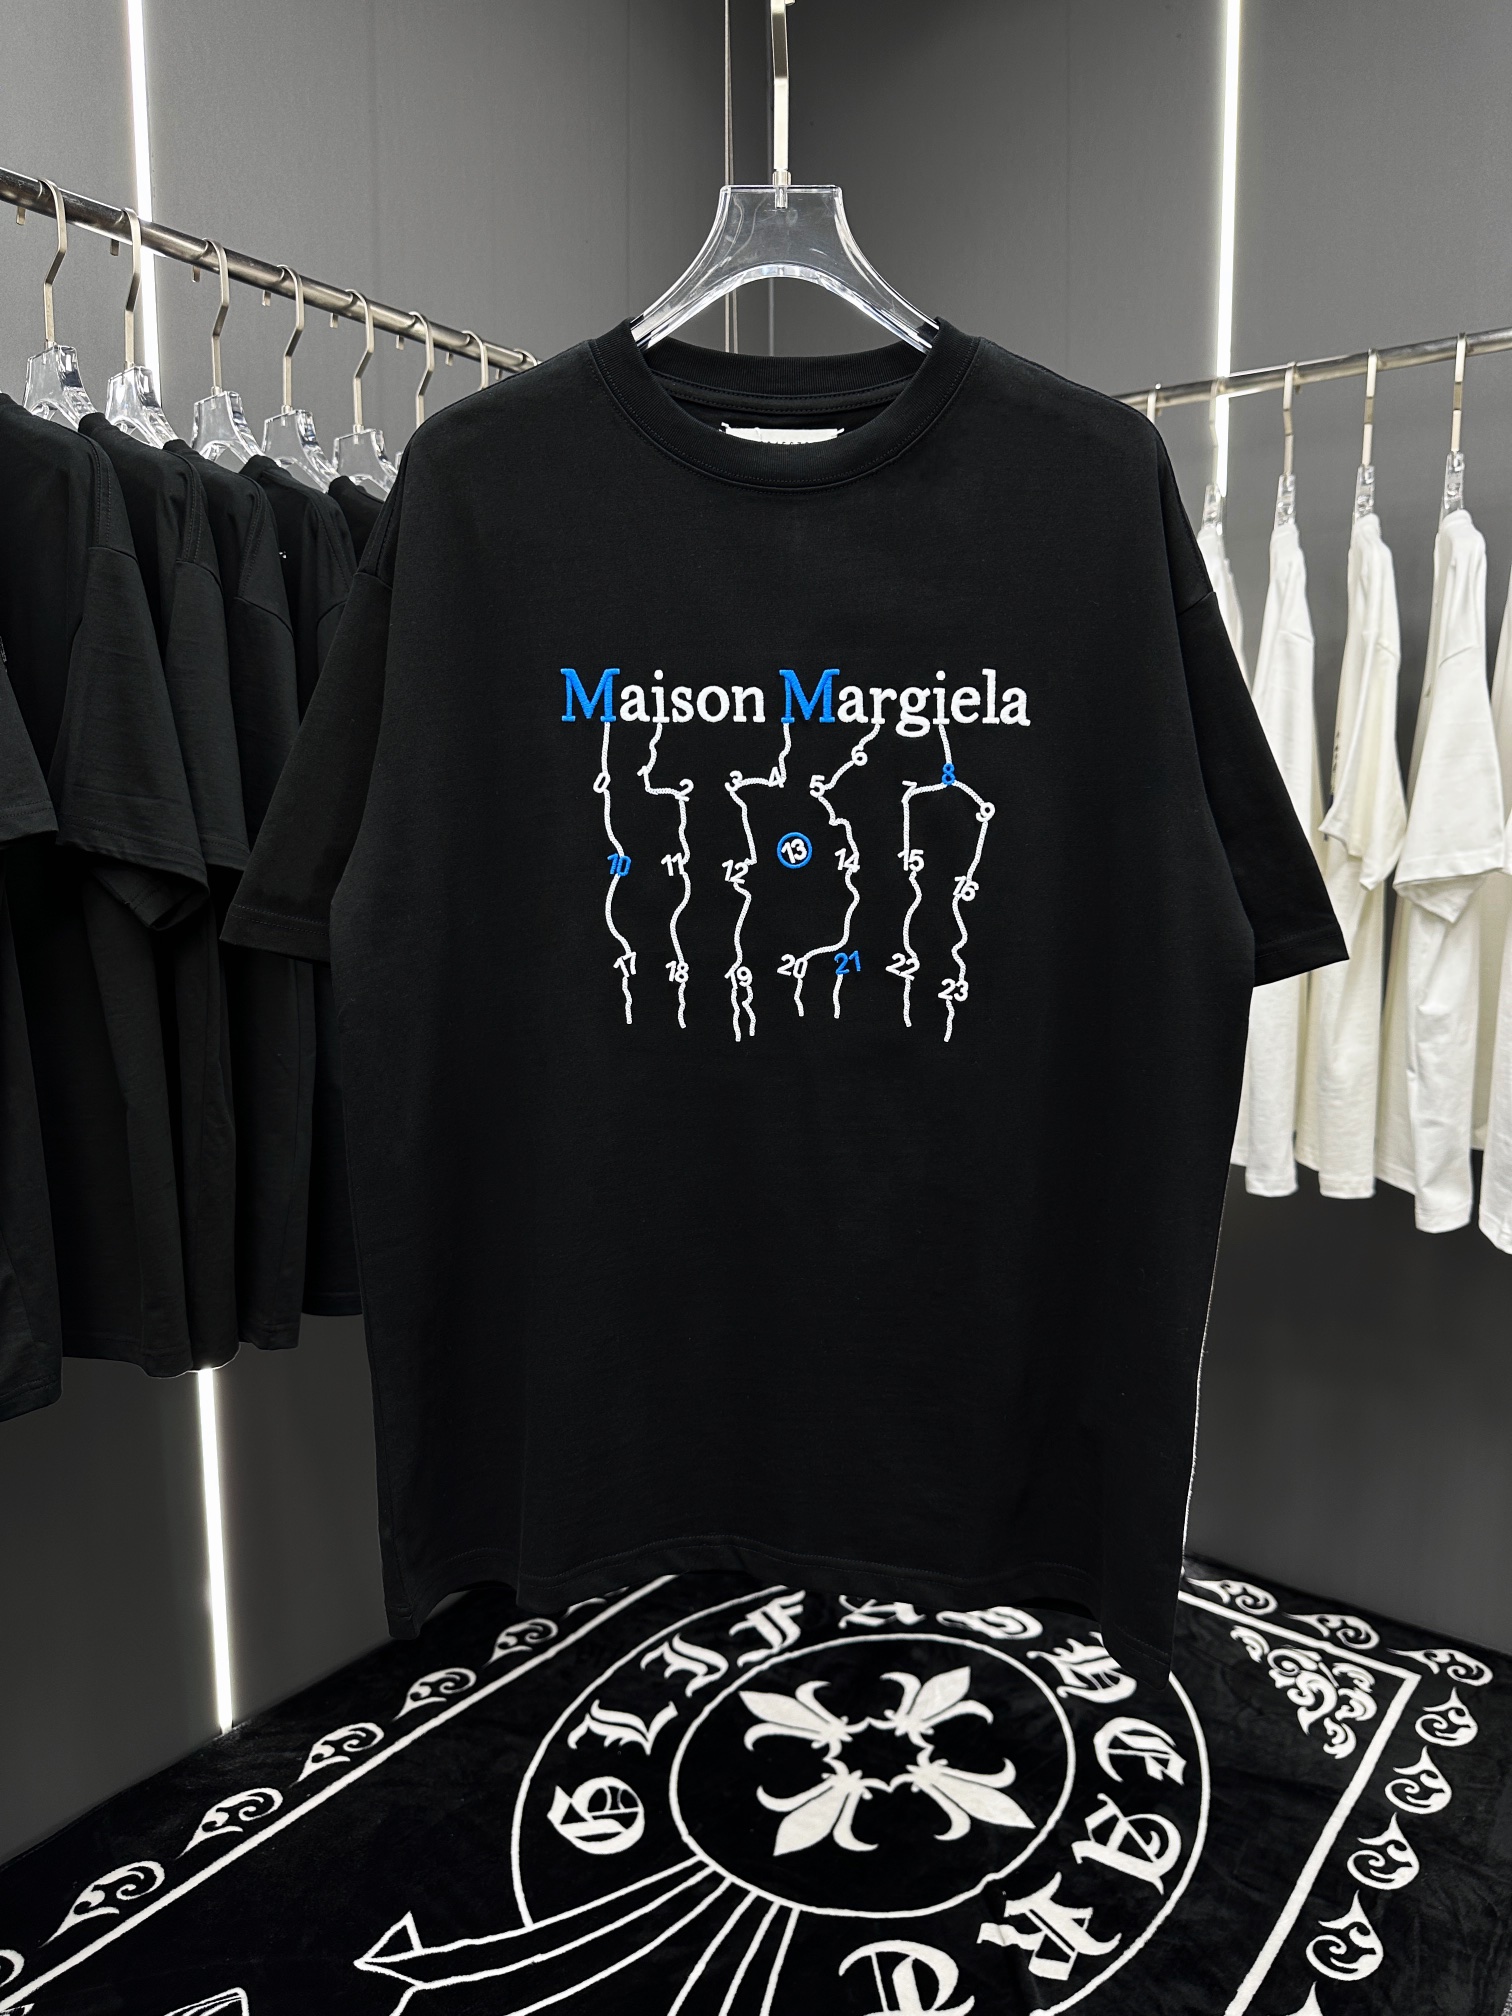 AAA Quality Replica
 Maison Margiela AAAAA+
 Clothing T-Shirt Black White Embroidery Unisex Cotton Spring/Summer Collection Short Sleeve